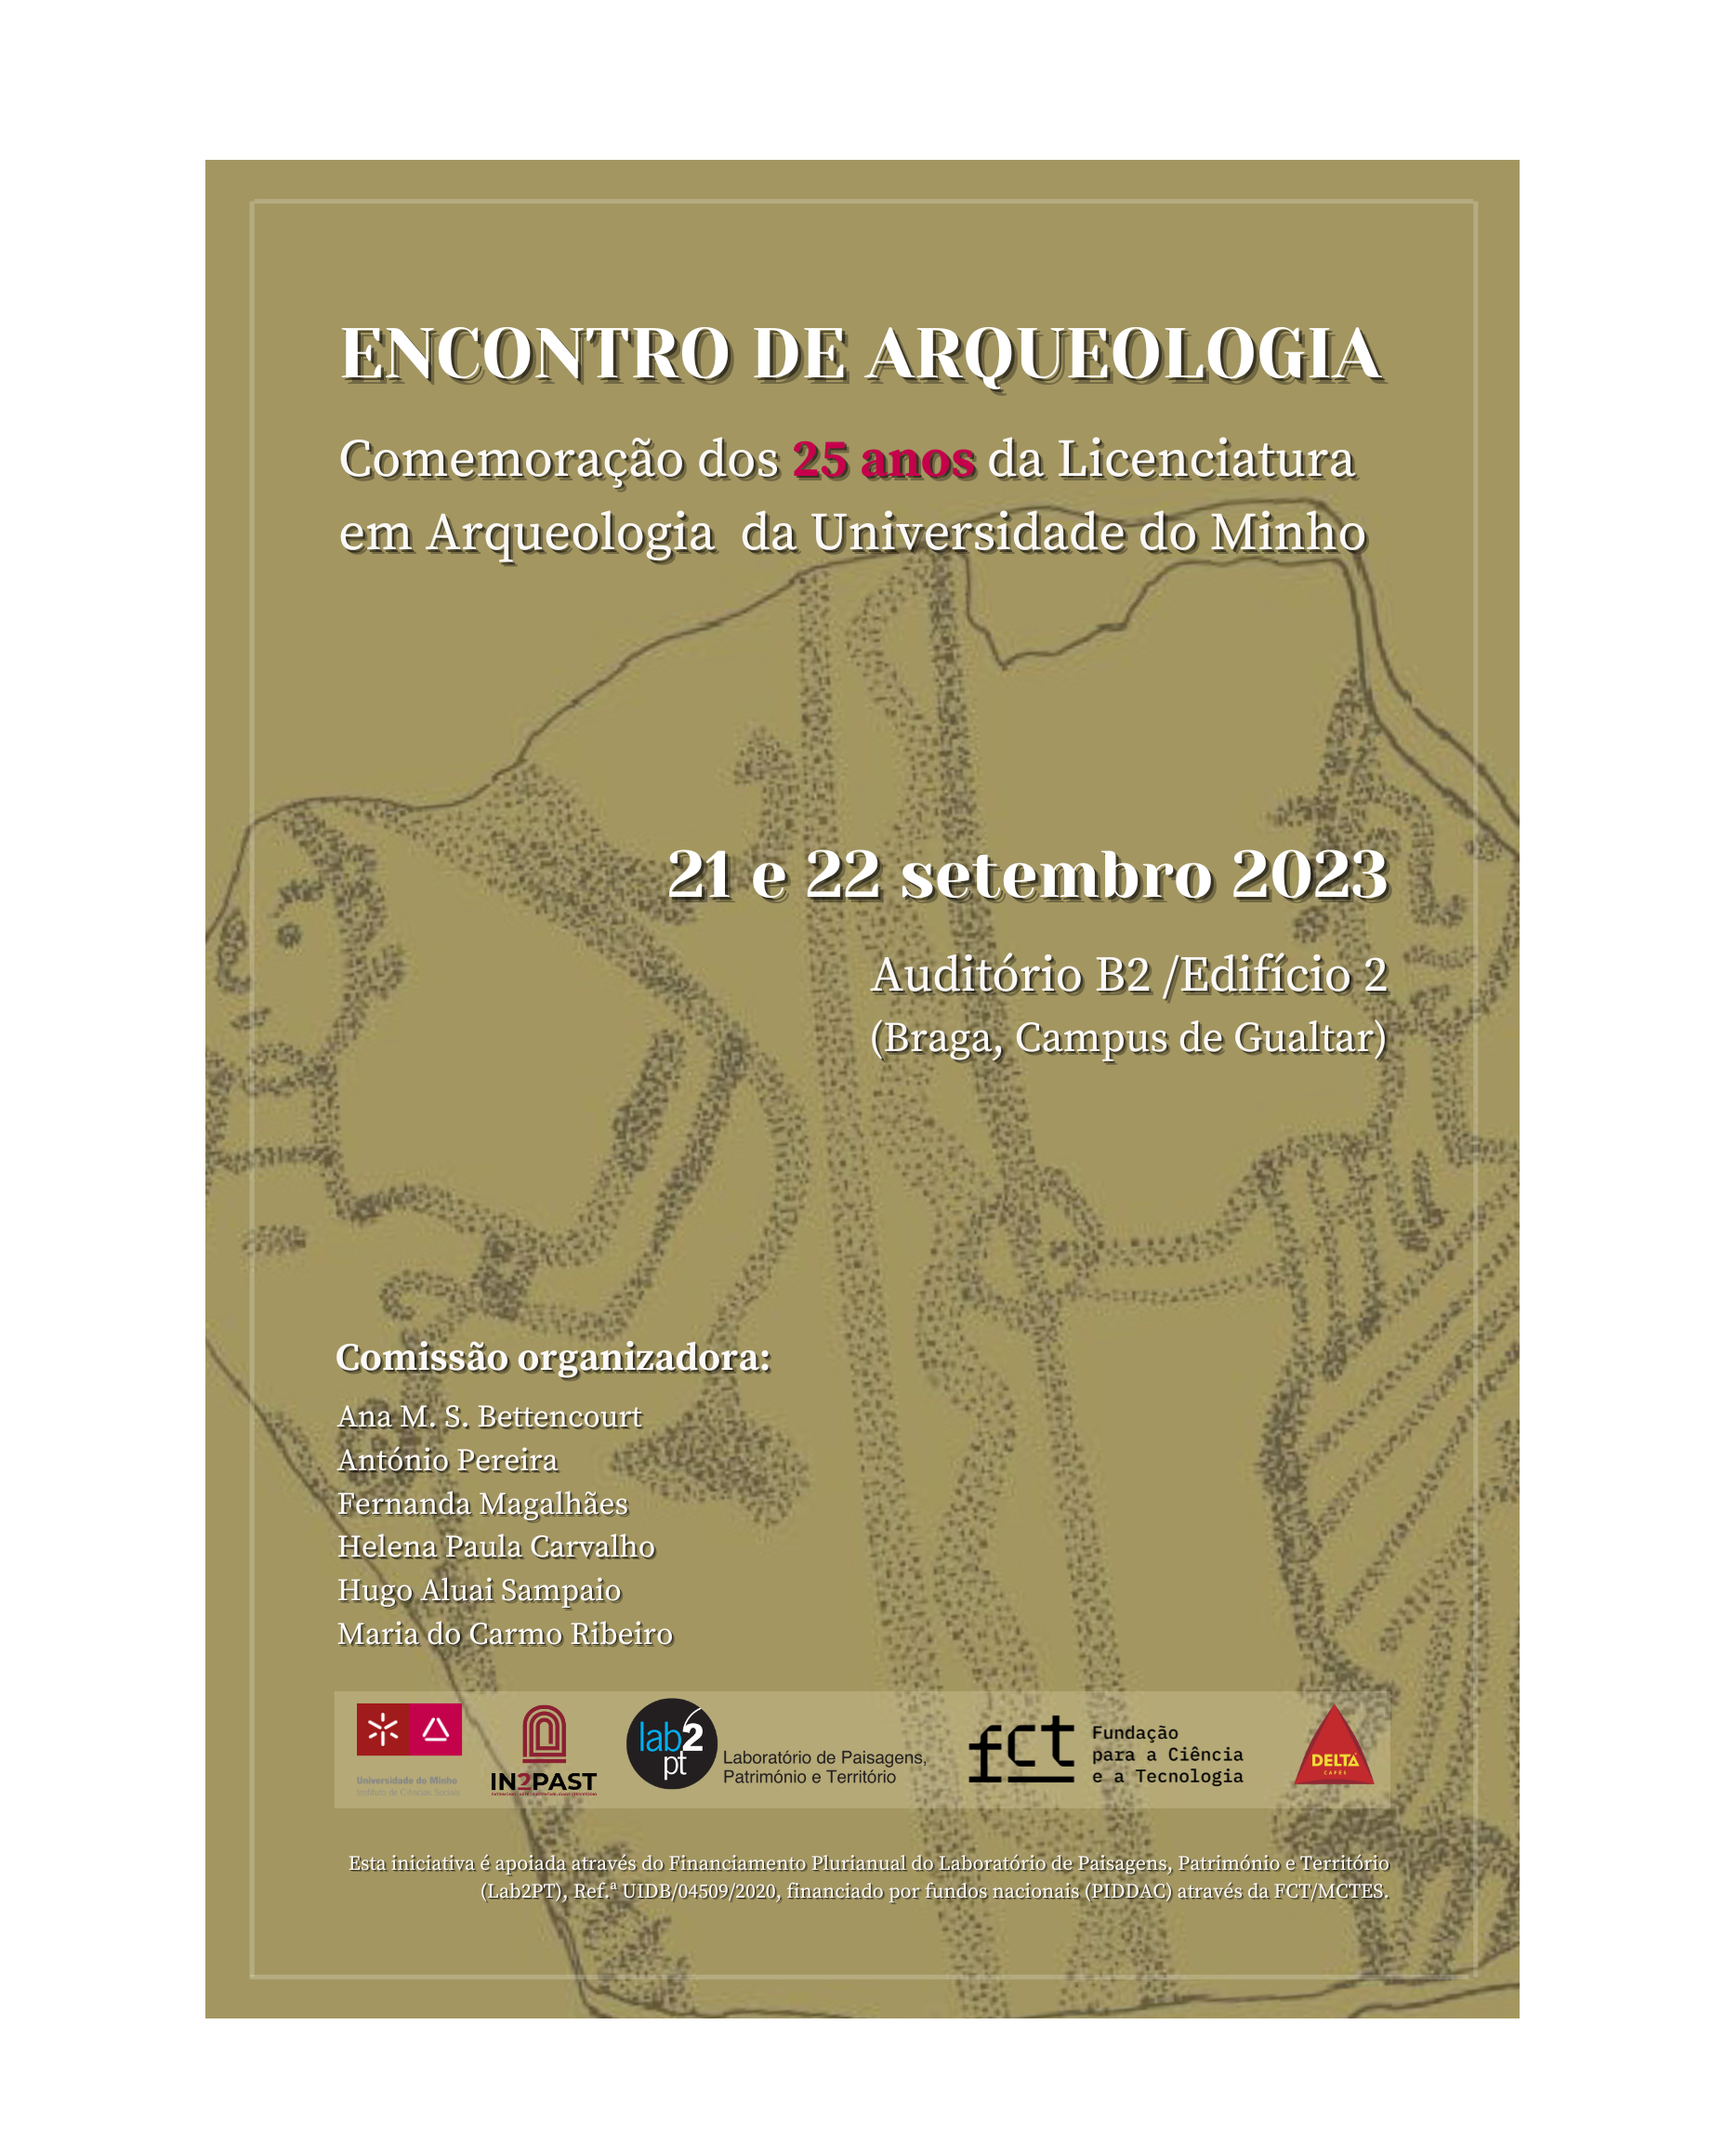 Archaeology Meeting. Celebration of the 25th Anniversary of the Archaeology Degree of the University of Minho image